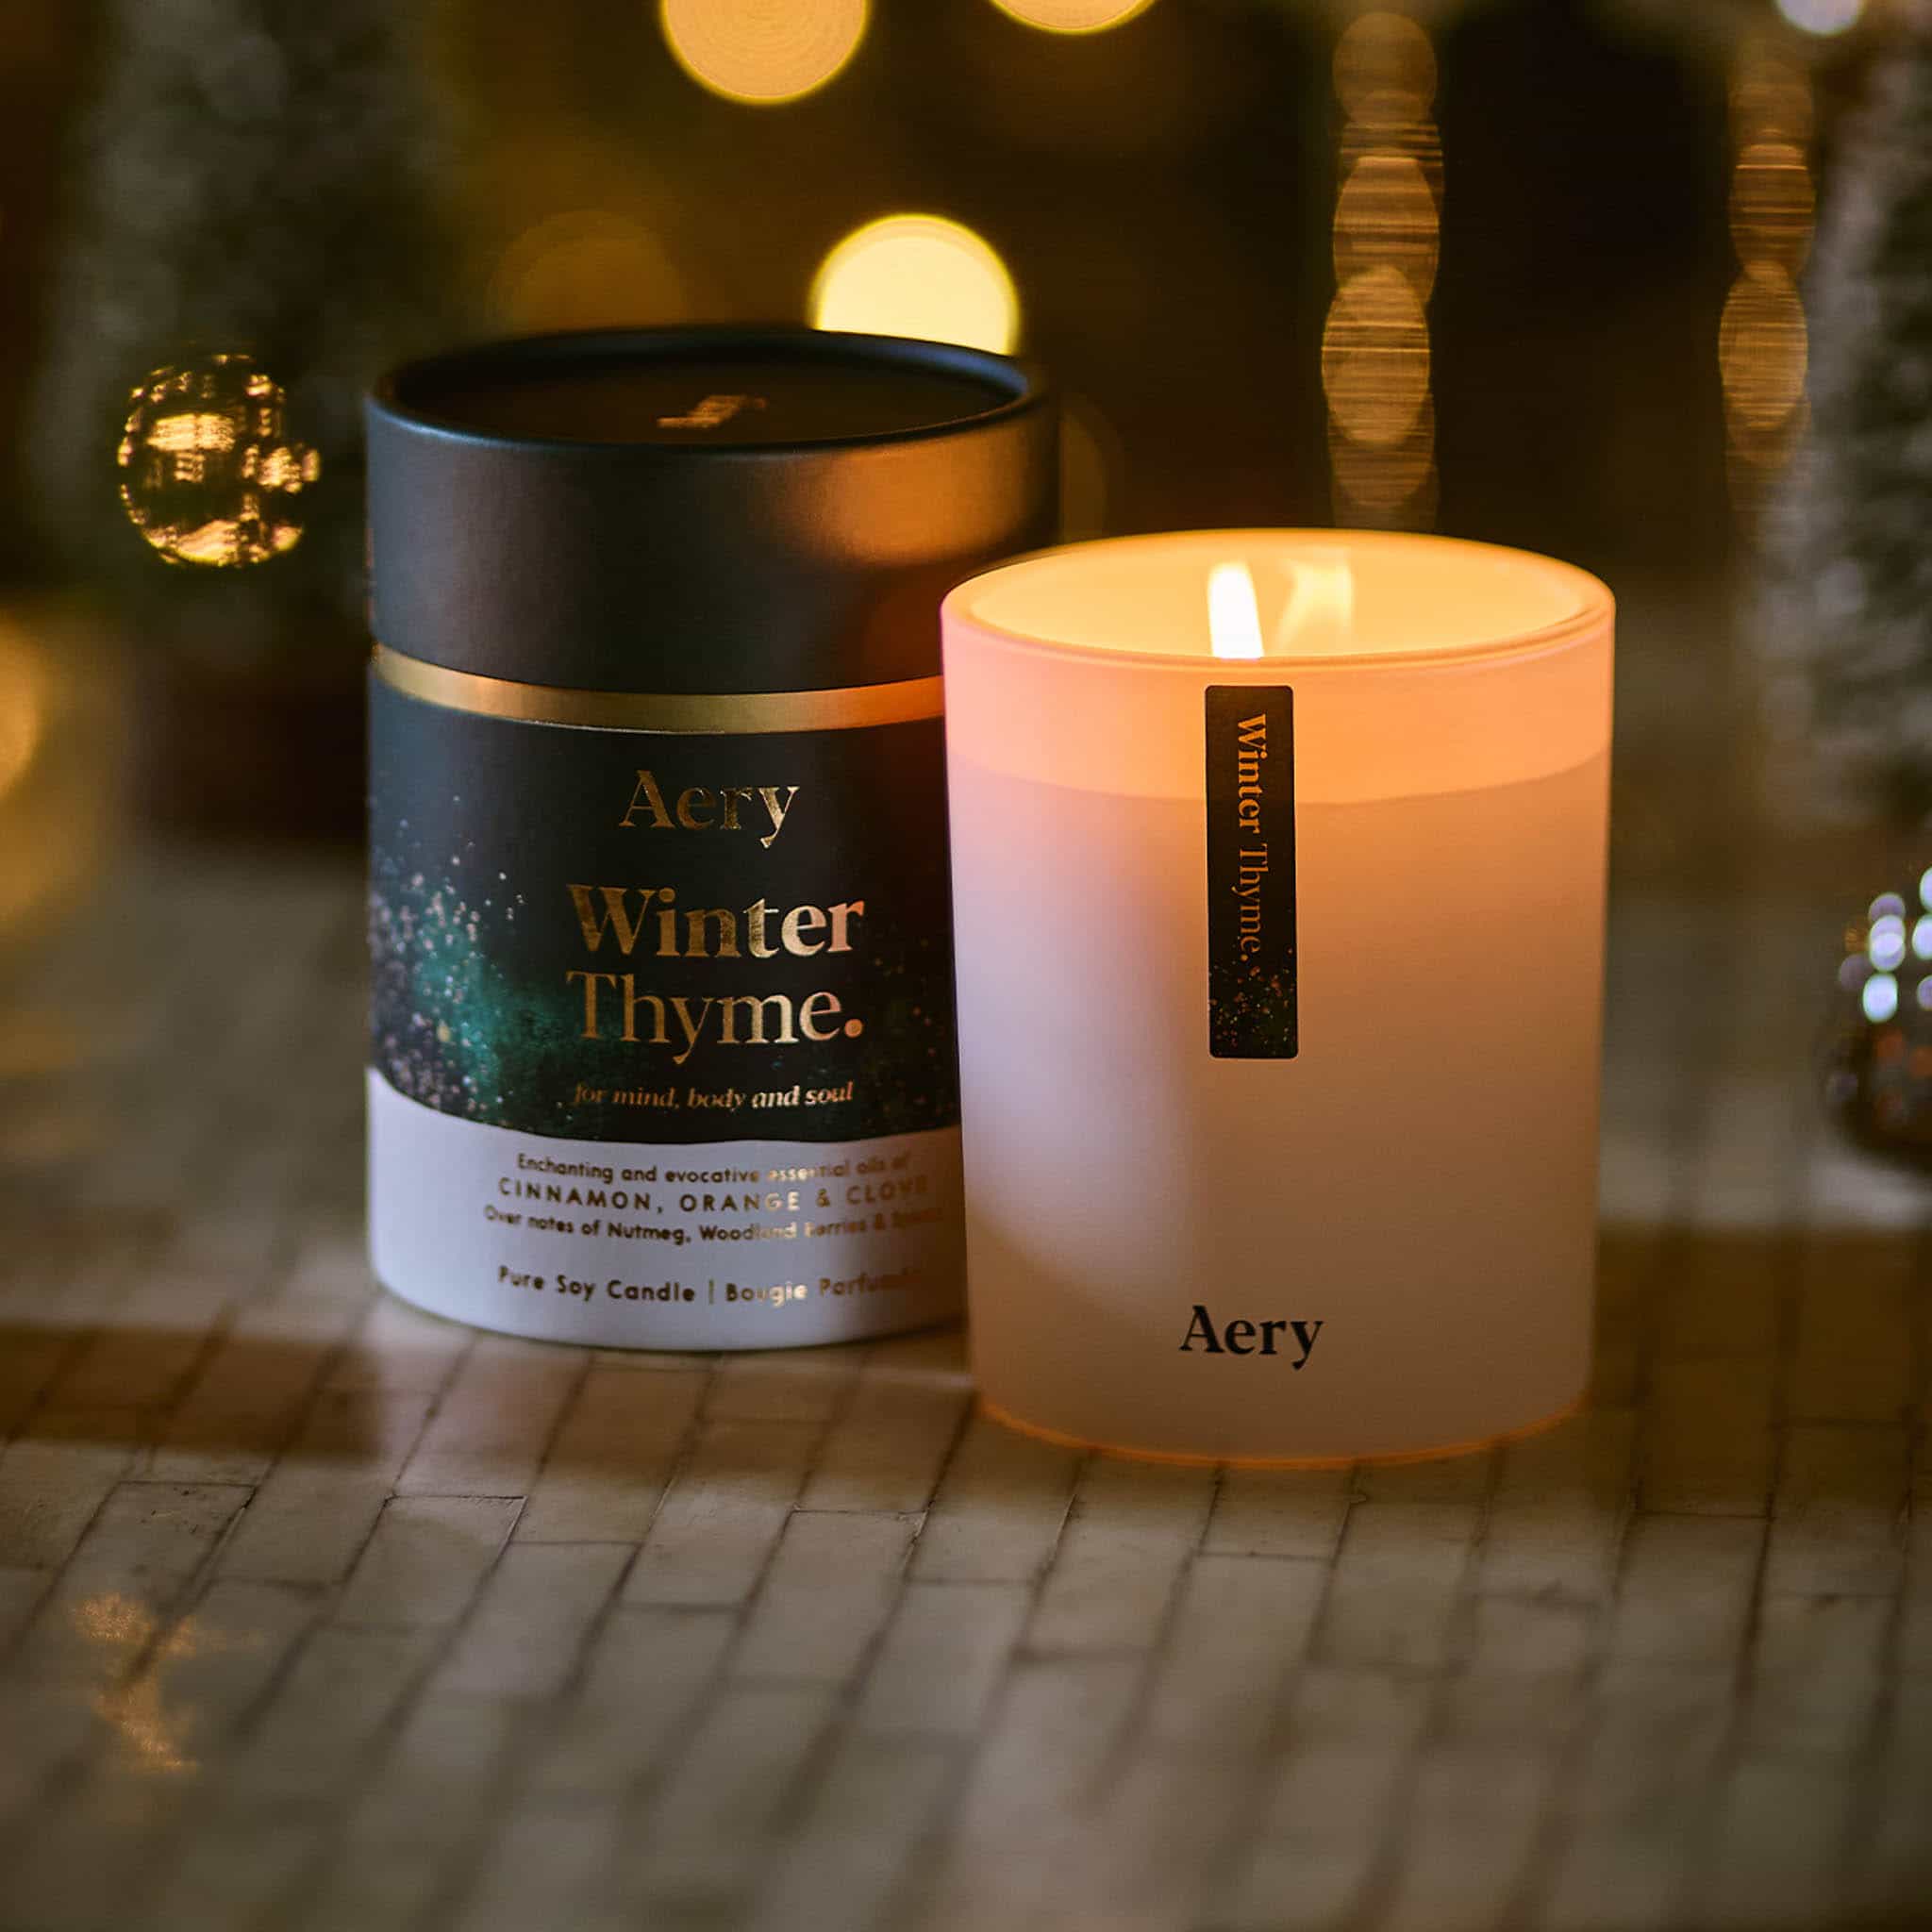 Aery Winter Thyme Candle, 200g